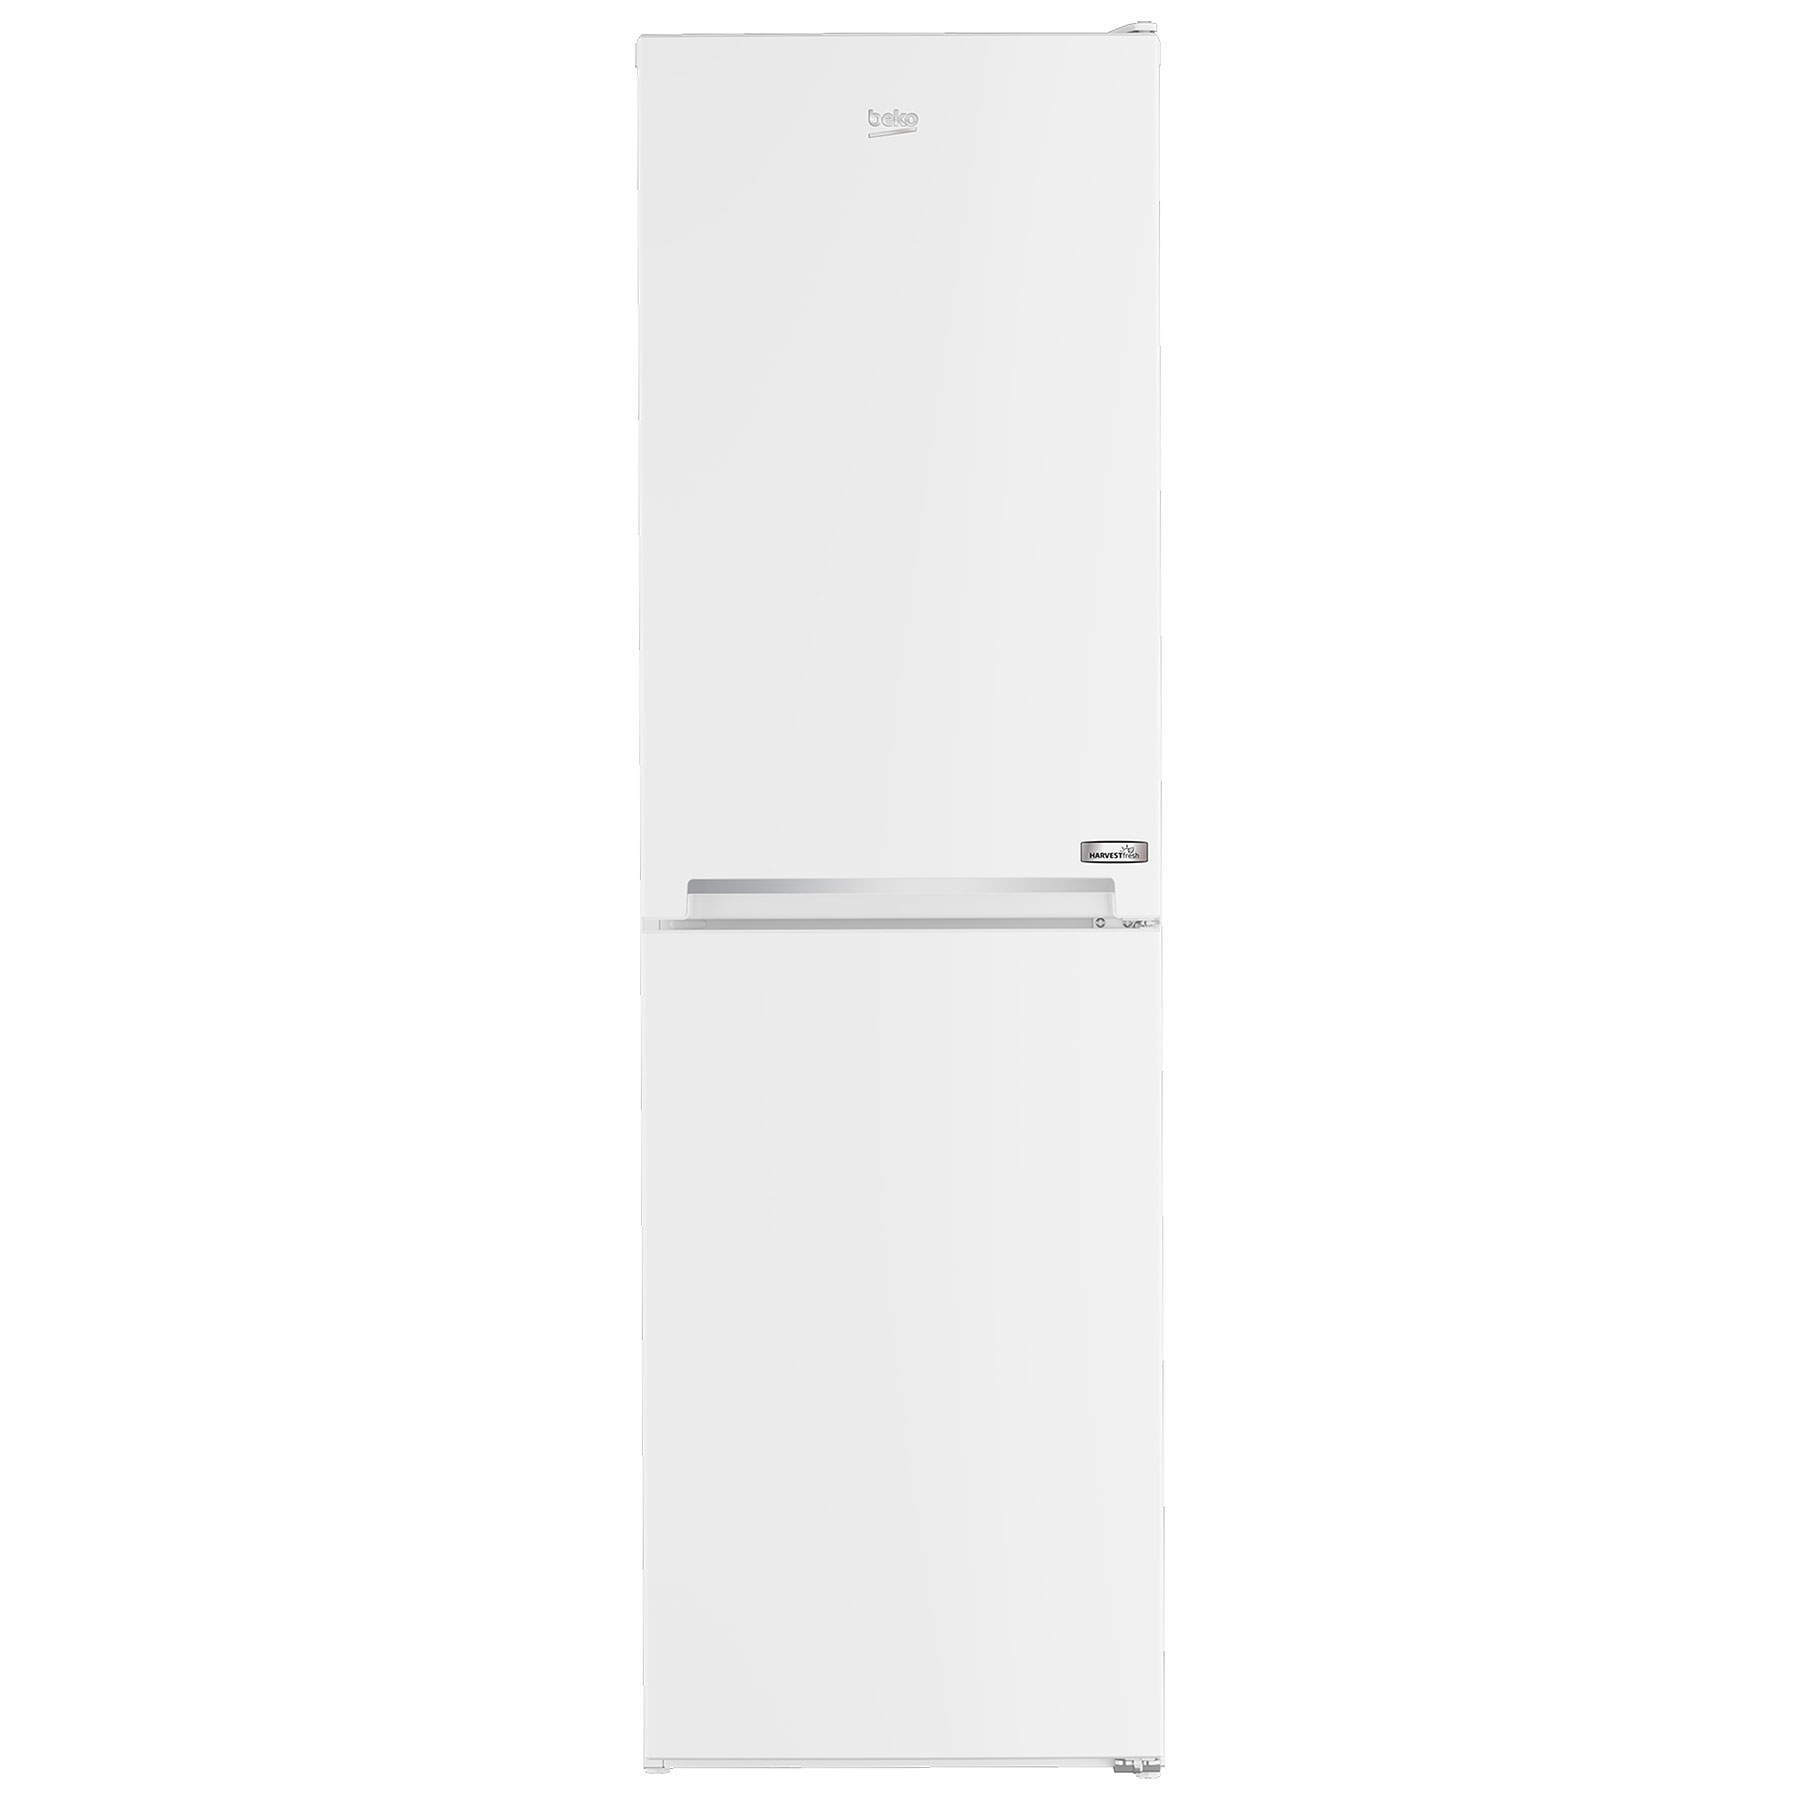 Beko CNG4582VW 55cm Frost Free Fridge Freezer in White 1 82m E Rated